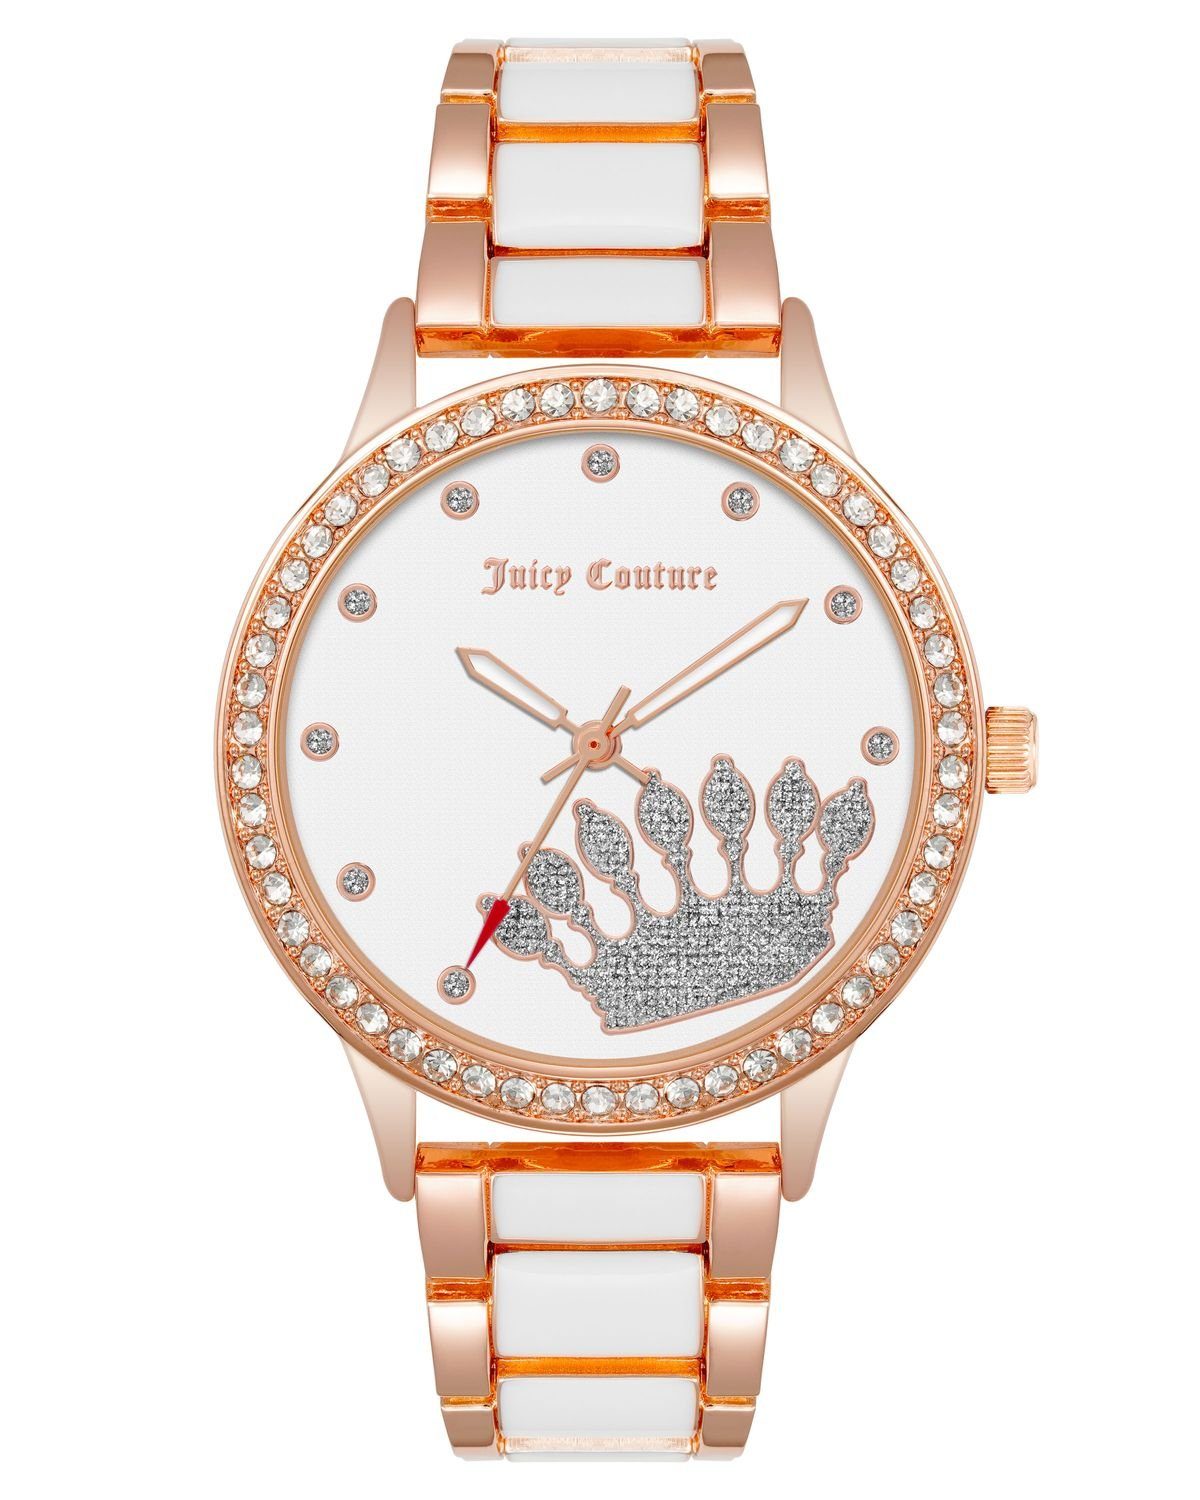 Juicy Couture Digitaluhr JC/1334RGWT